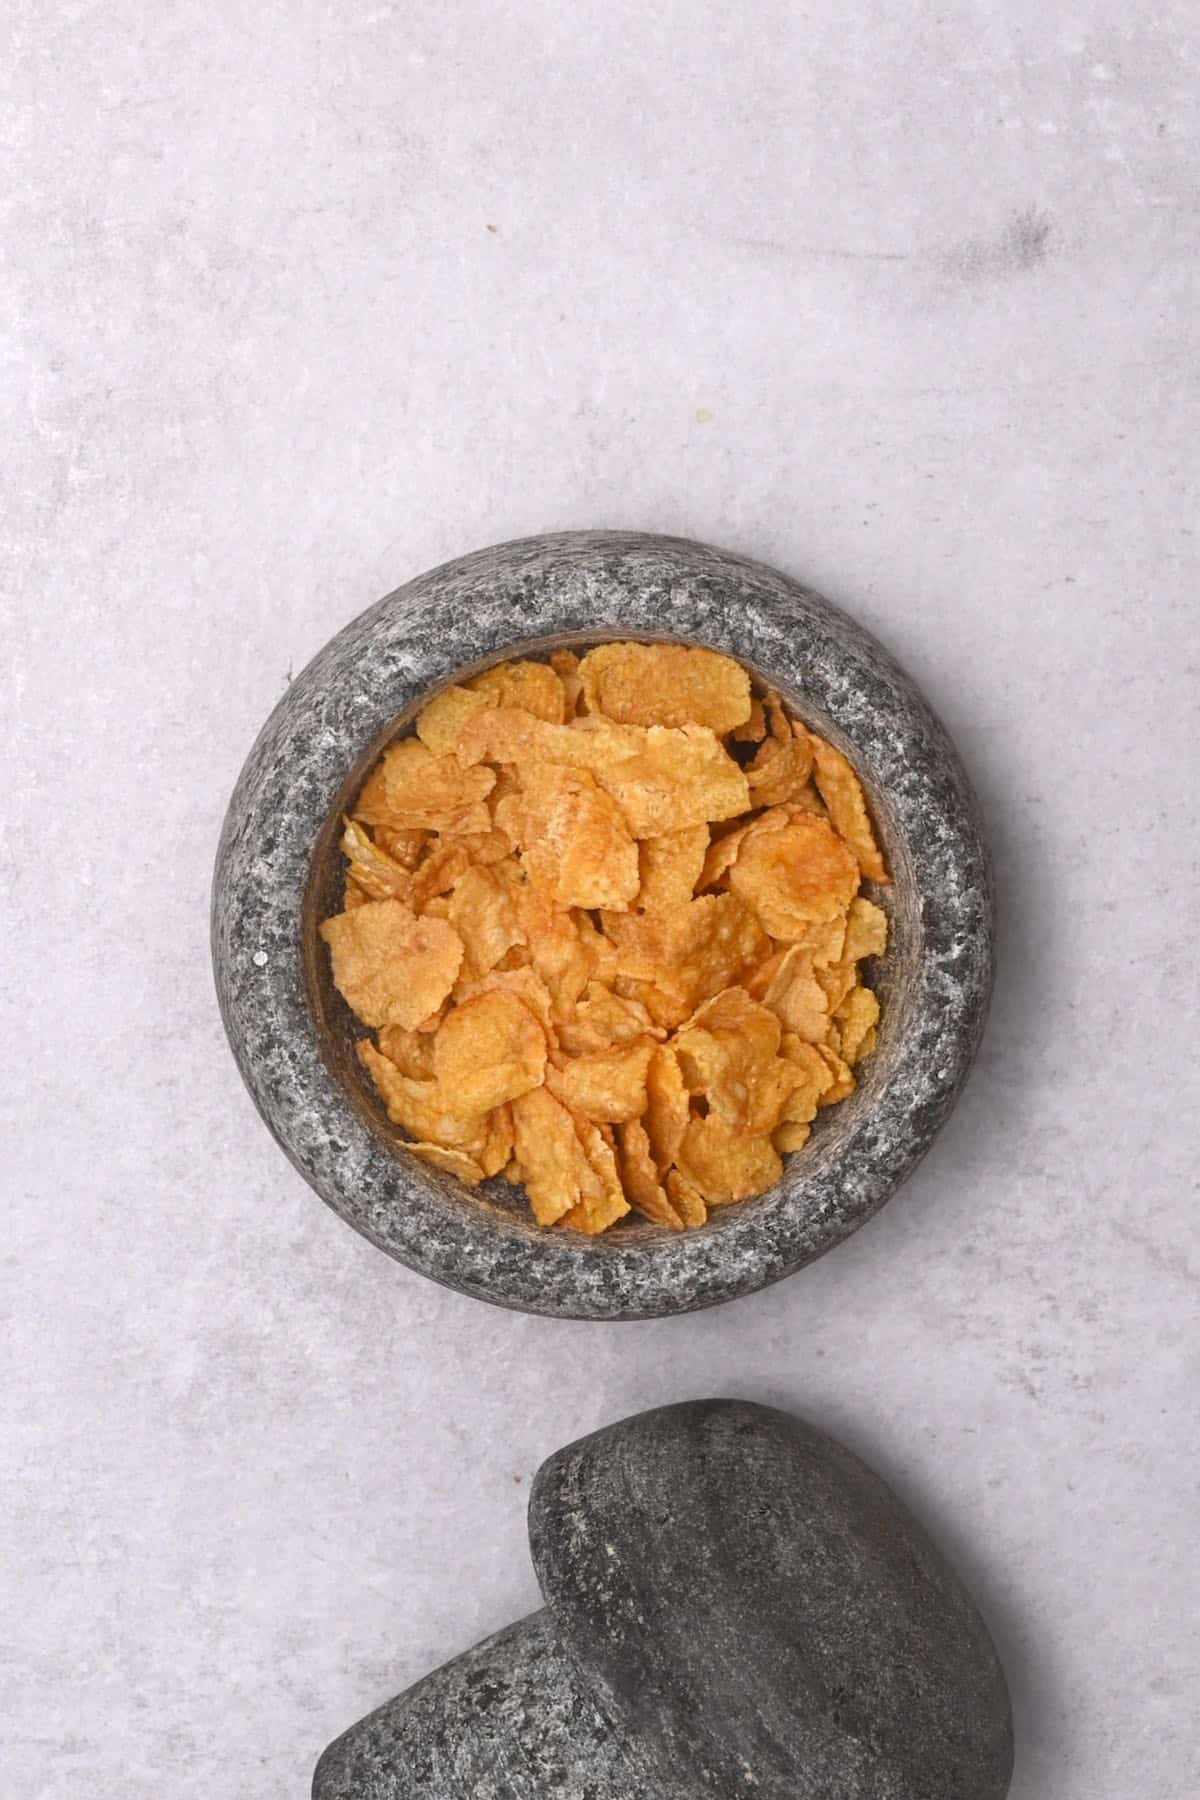 cornflakes inside pestle and mortar next to it